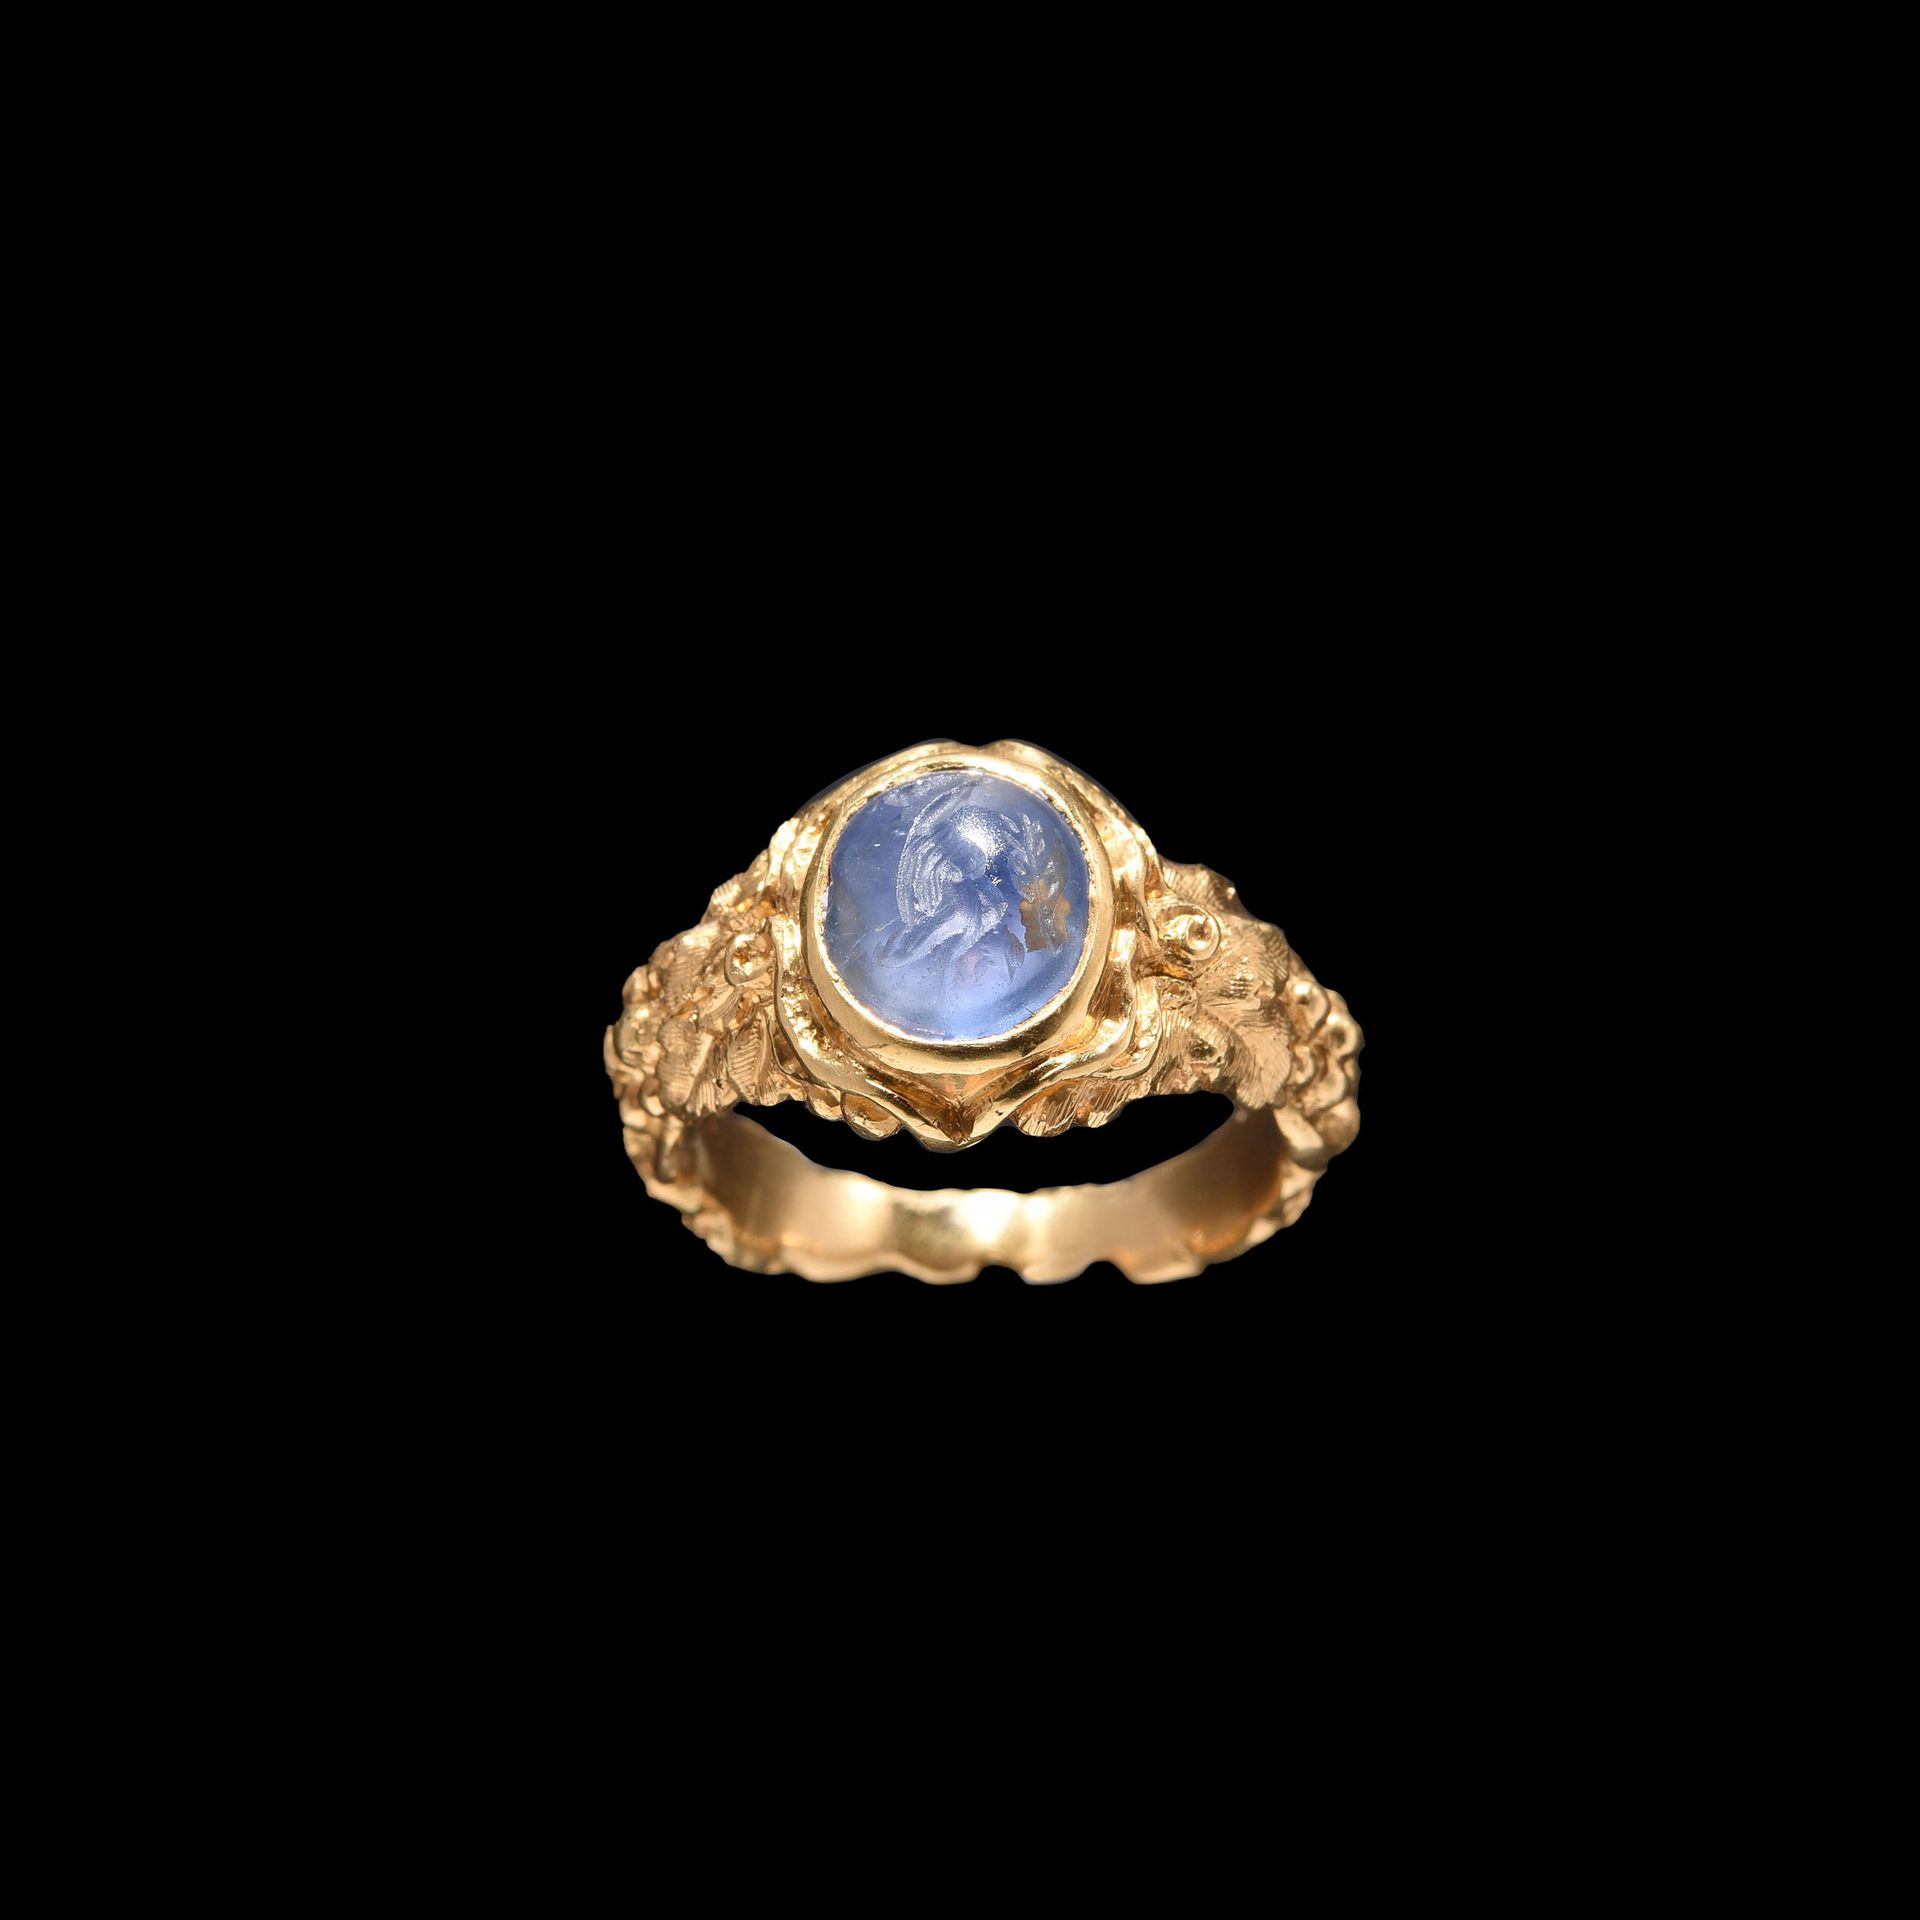 Null RING PATON CO

Roman art, 1st-2nd century.

Victorian gold, set with a roma&hellip;